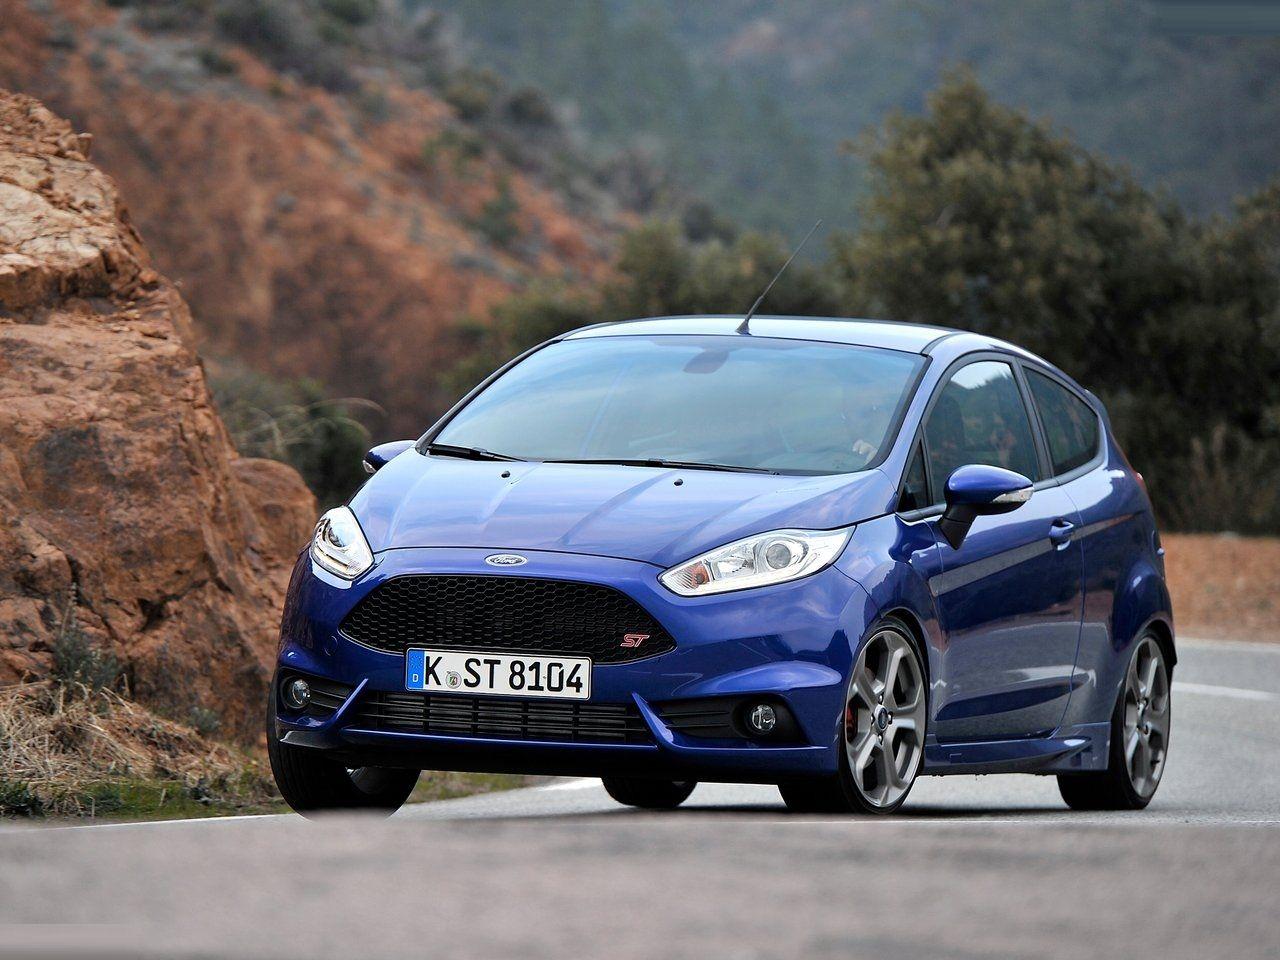 Ford Fiesta ST, Picture, Pics, Photo, Image